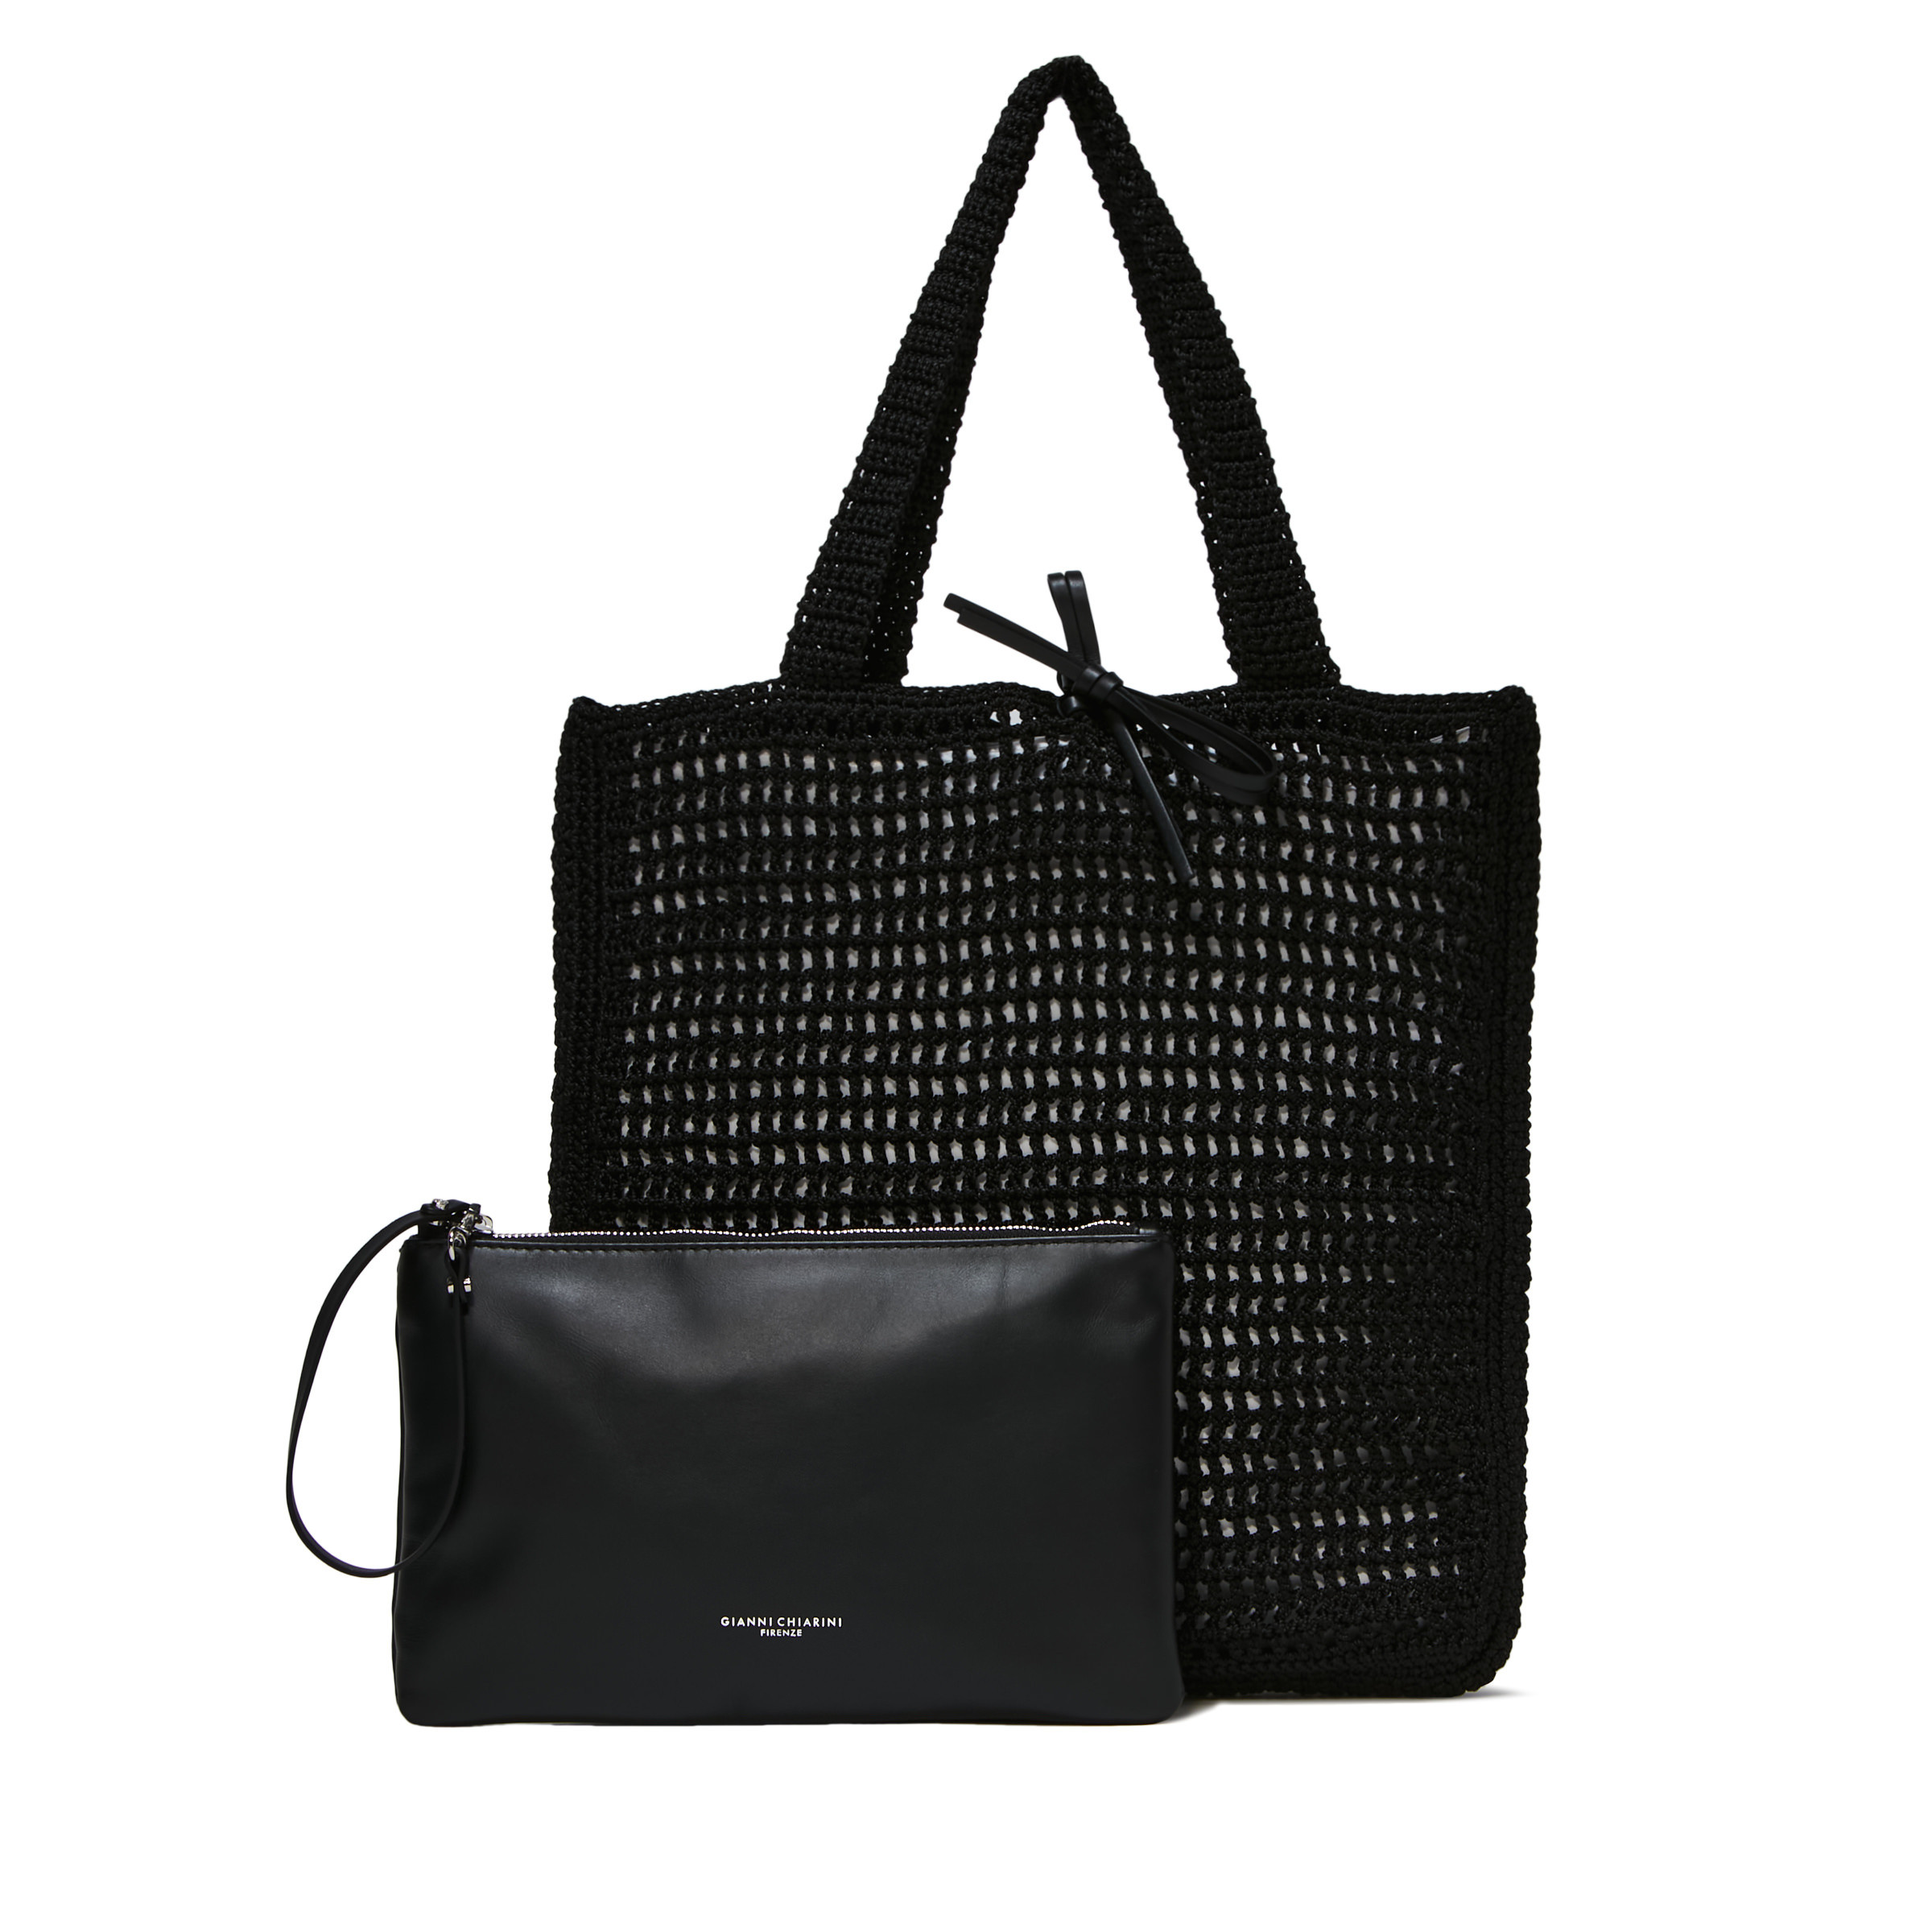 Gianni Chiarini - Victoria bag in leather and fabric, Black, large image number 2